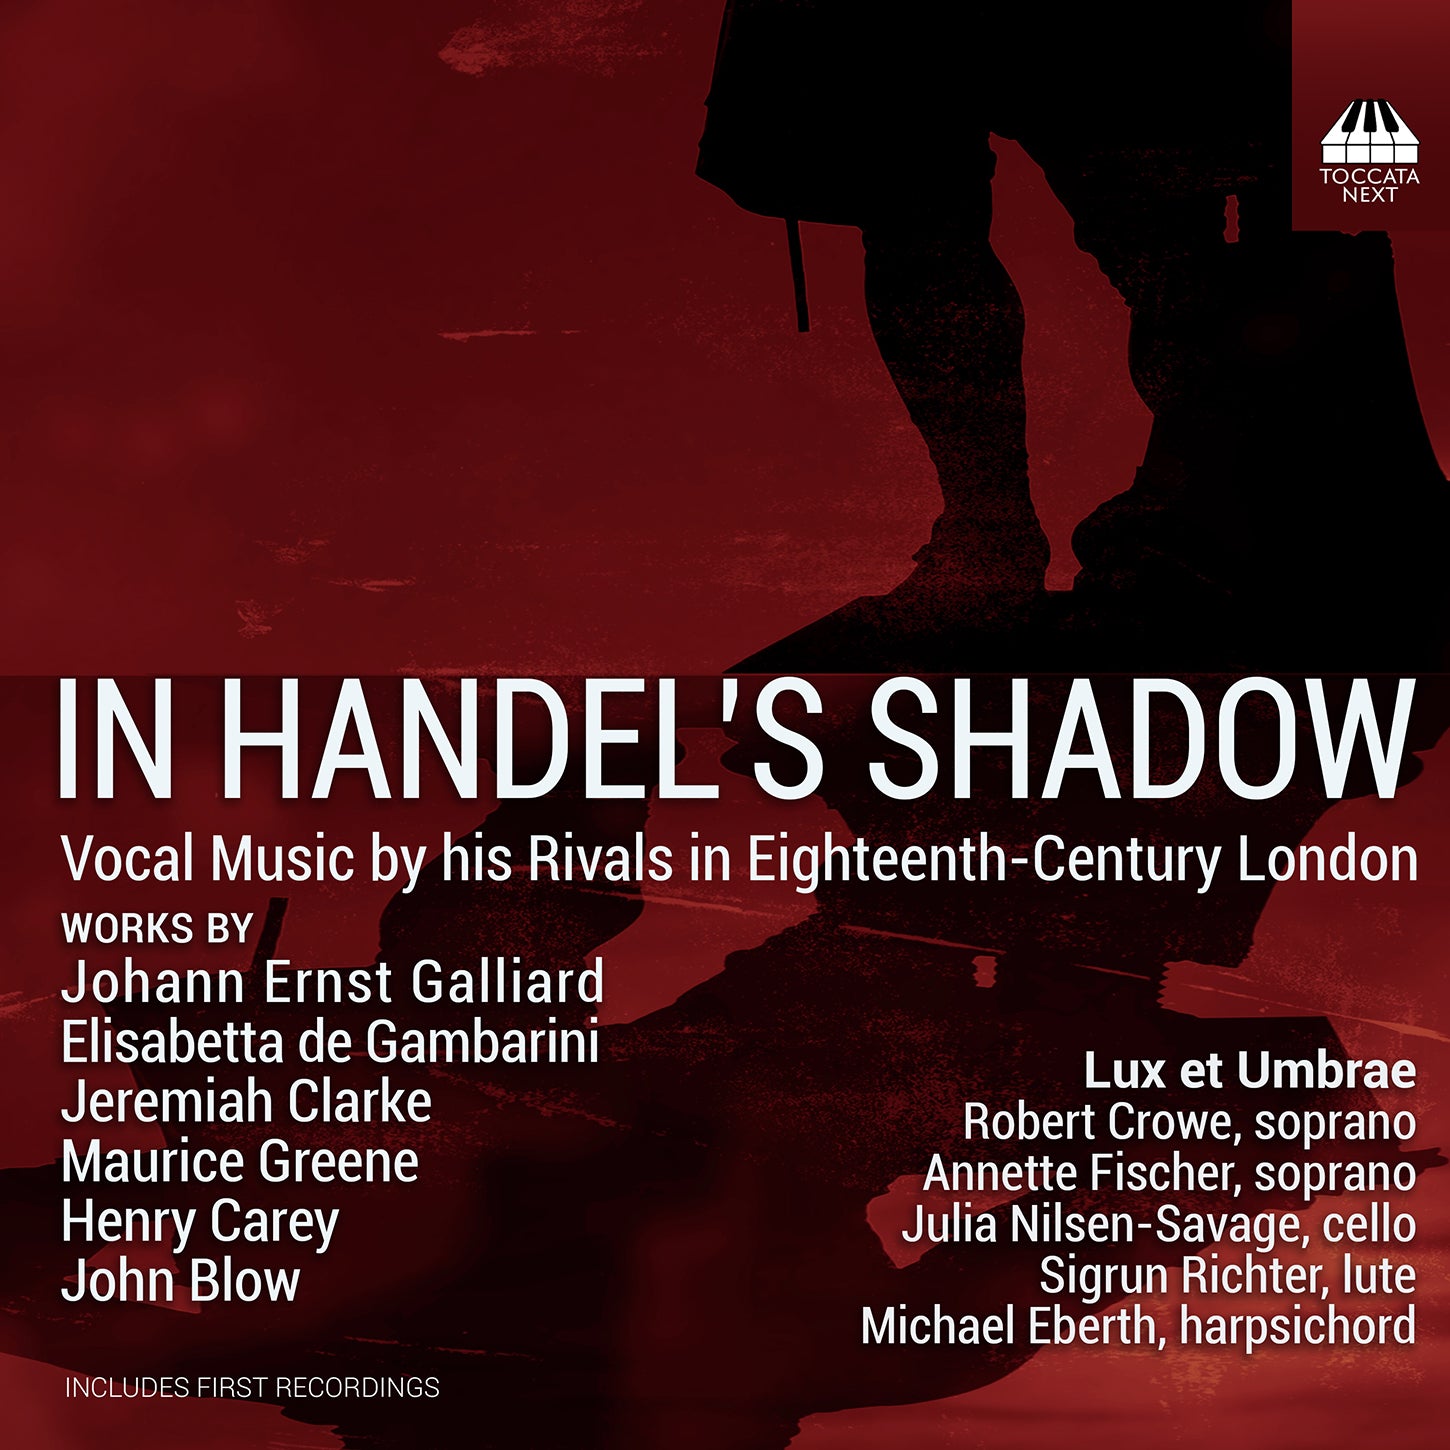 In Handel's Shadow - Vocal Music by His Rivals in Eighteenth-Century London